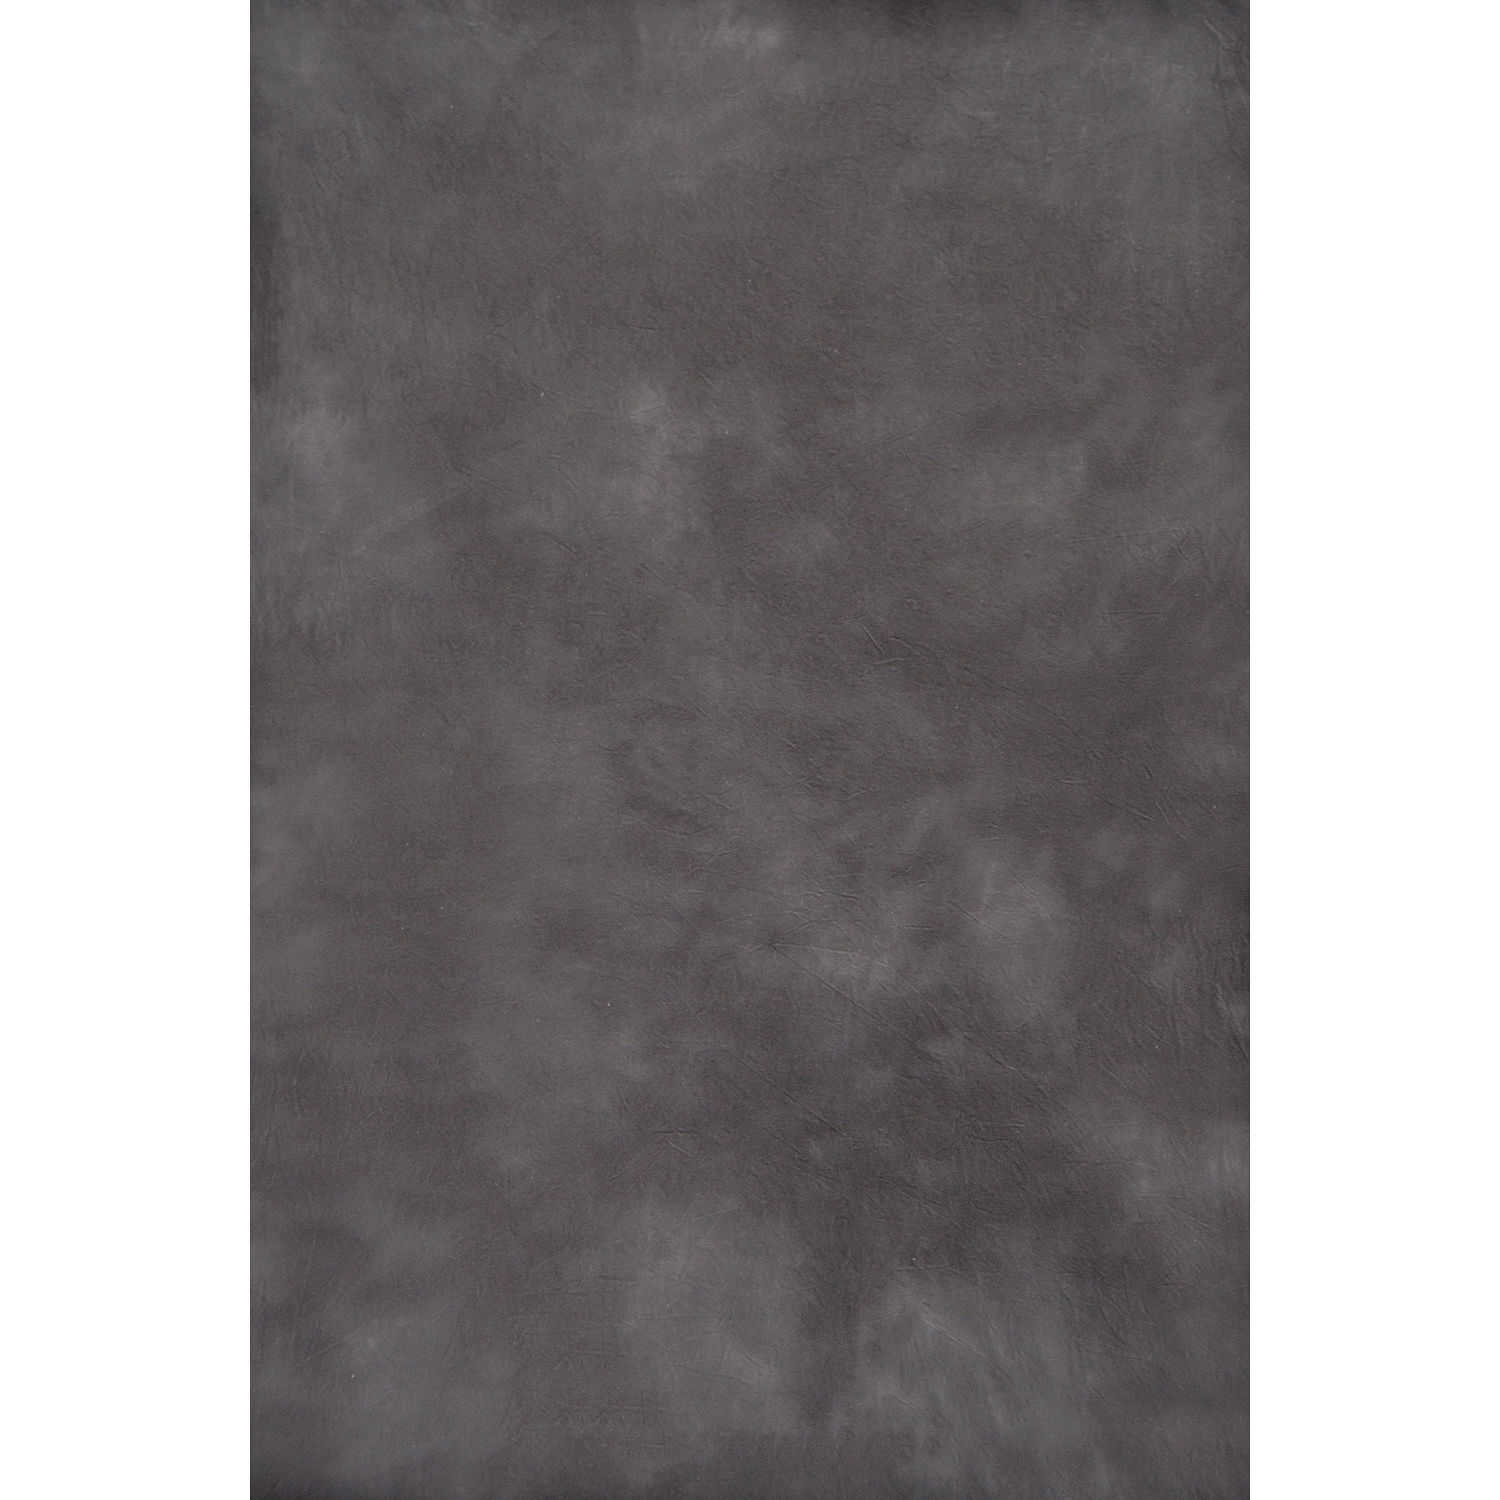 Savage Painted Canvas Backdrop (5x7', Eclipse) CP512-0507 B&H